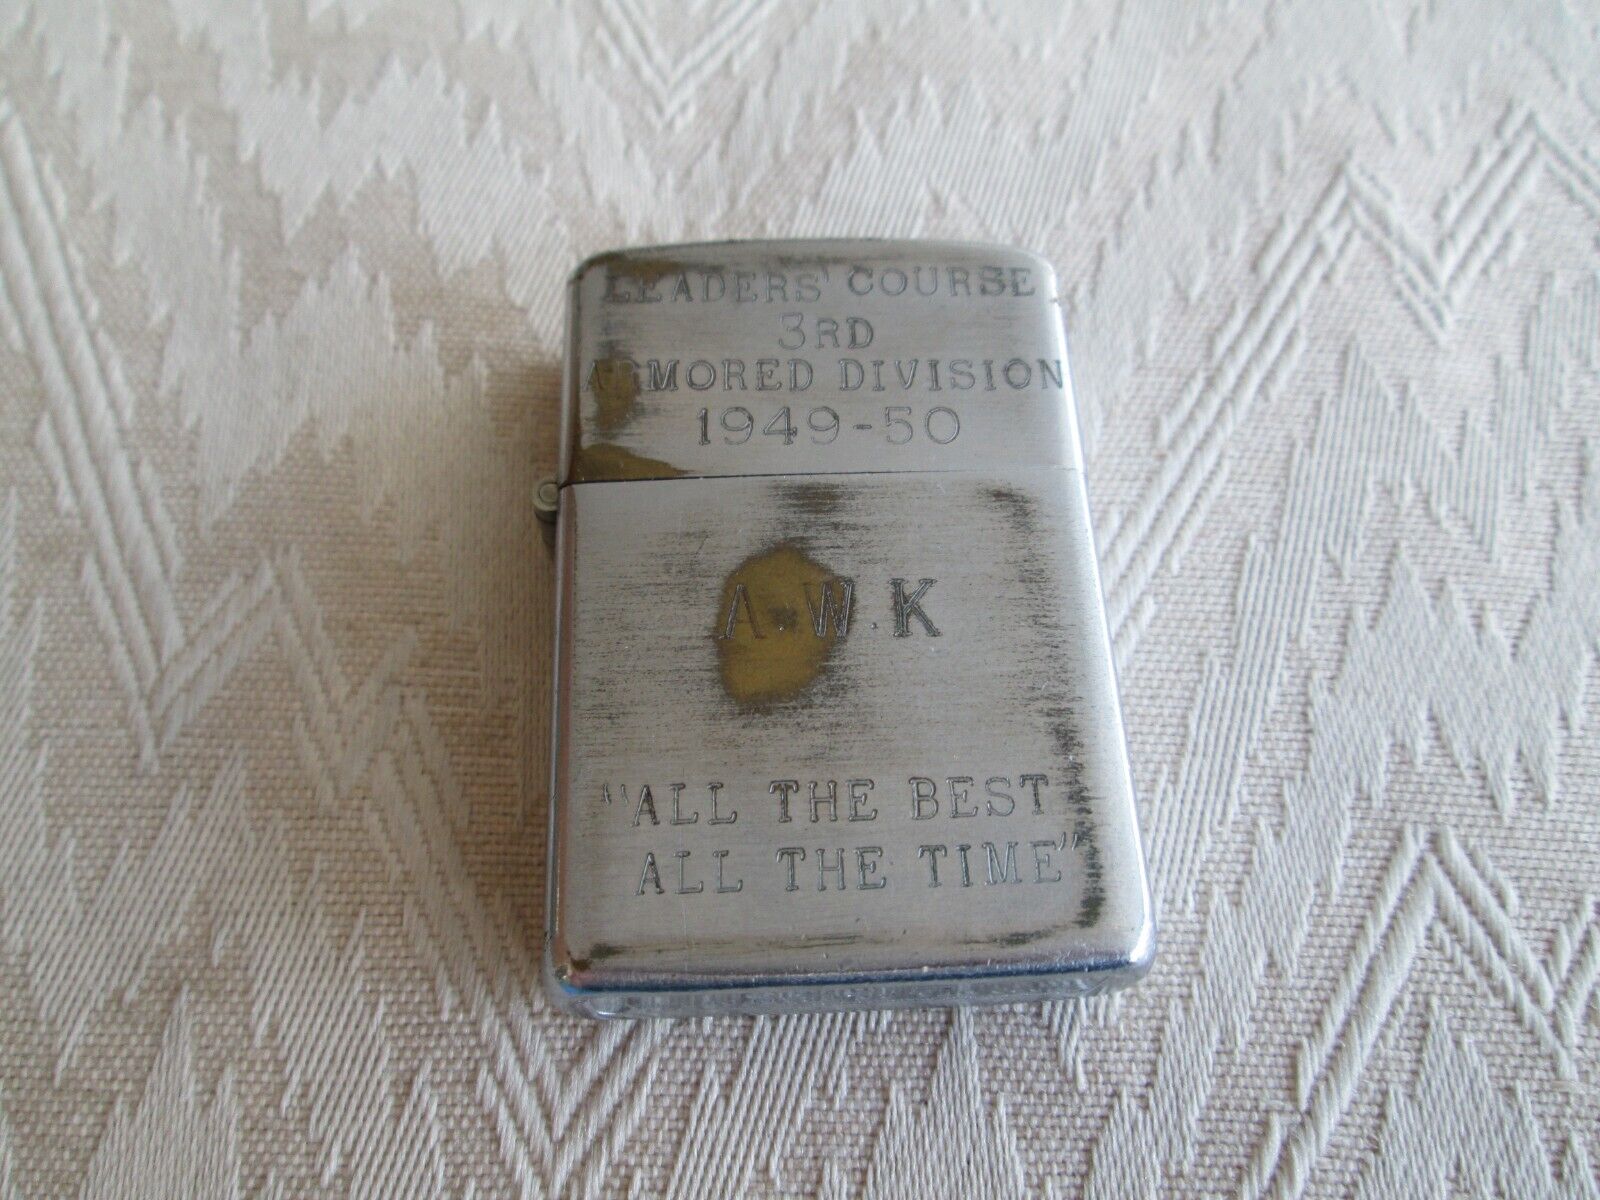 Vintage 1949-50 US Army Zippo Lighter with 5 Barrel Hinge/3rd Armored Division